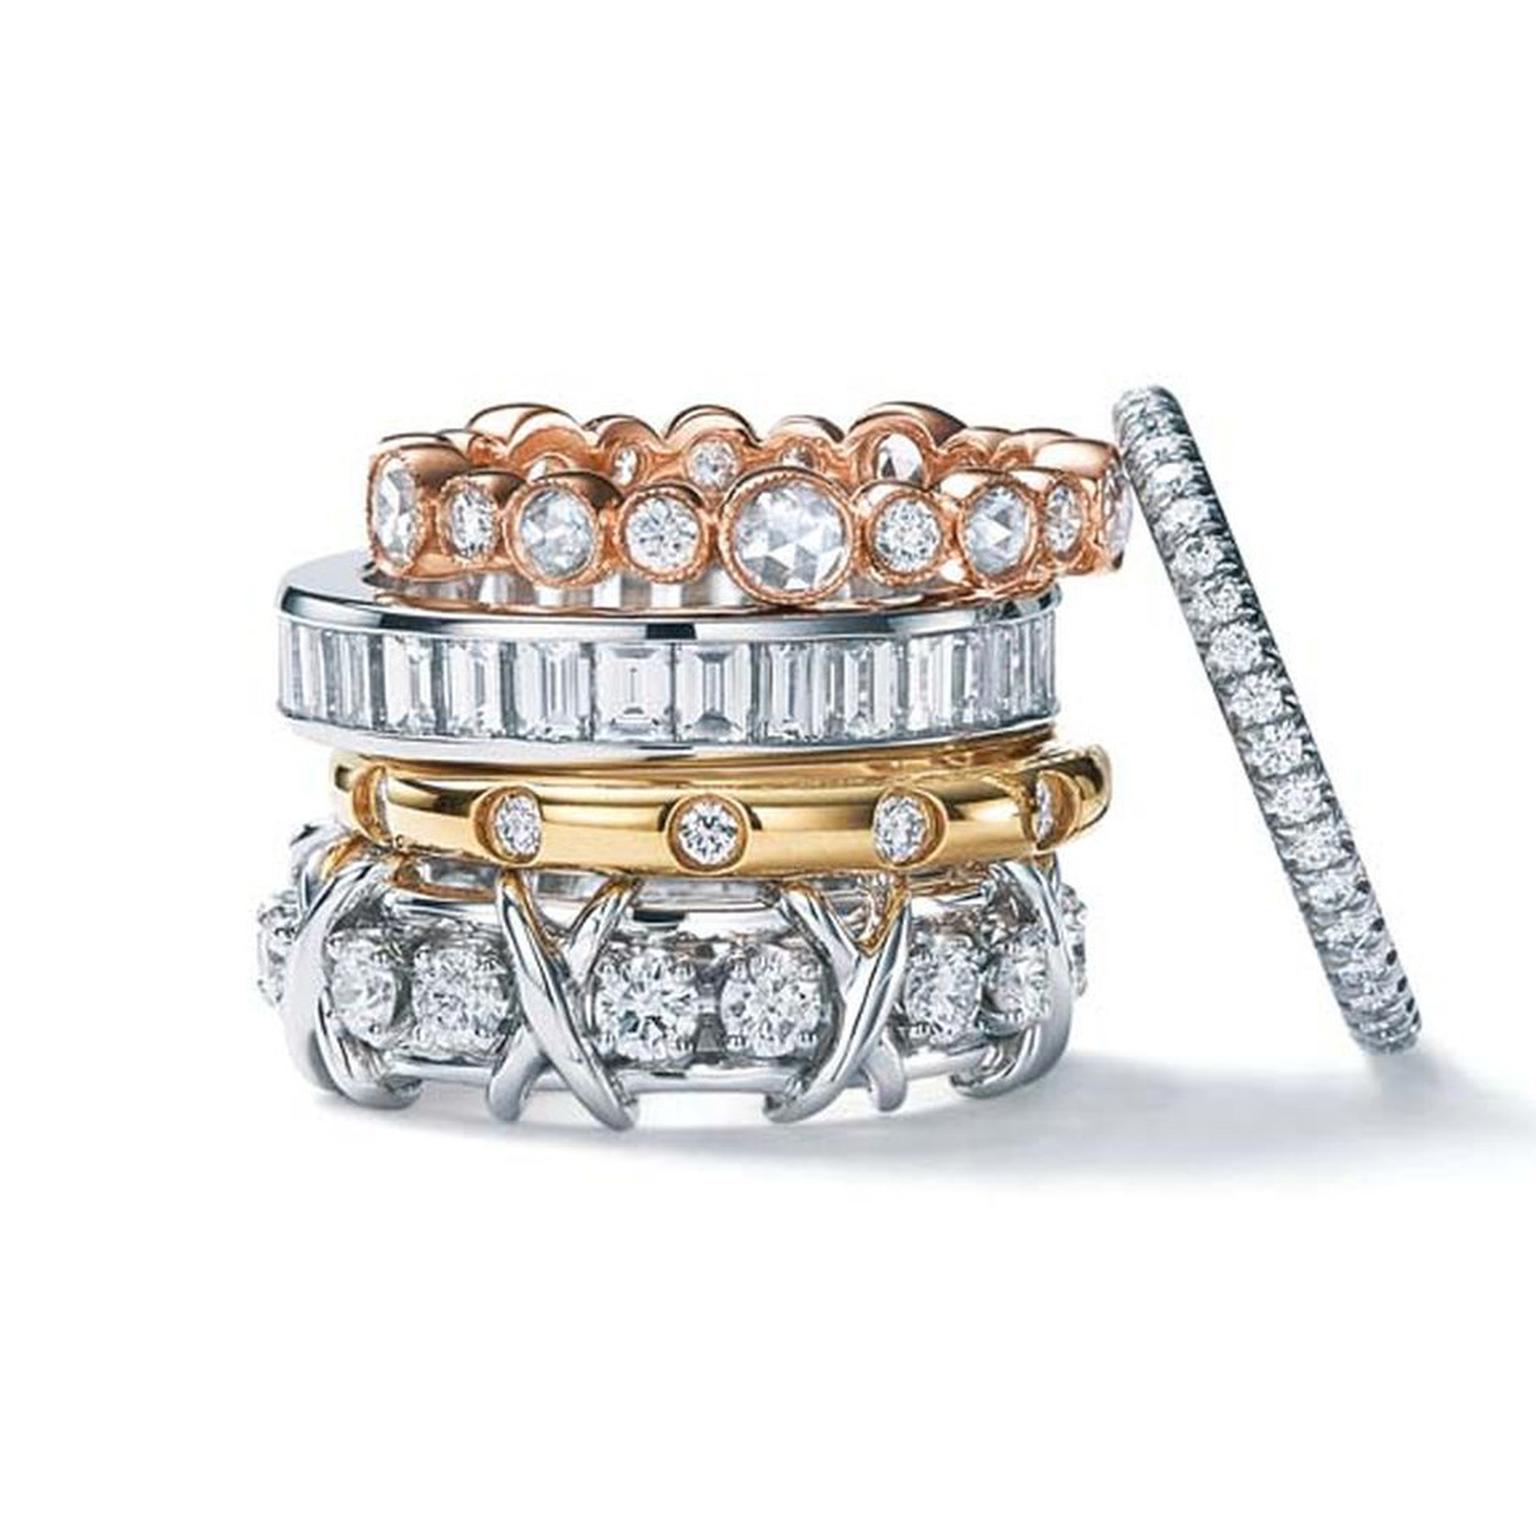 Tiffany Jazz ring in 18k rose gold, Channel-set in platinum; Tiffany Bezet in 18k gold; Tiffany & Co. Schlumberger Sixteen Stone in platinum; and Tiffany Soleste in platinum.